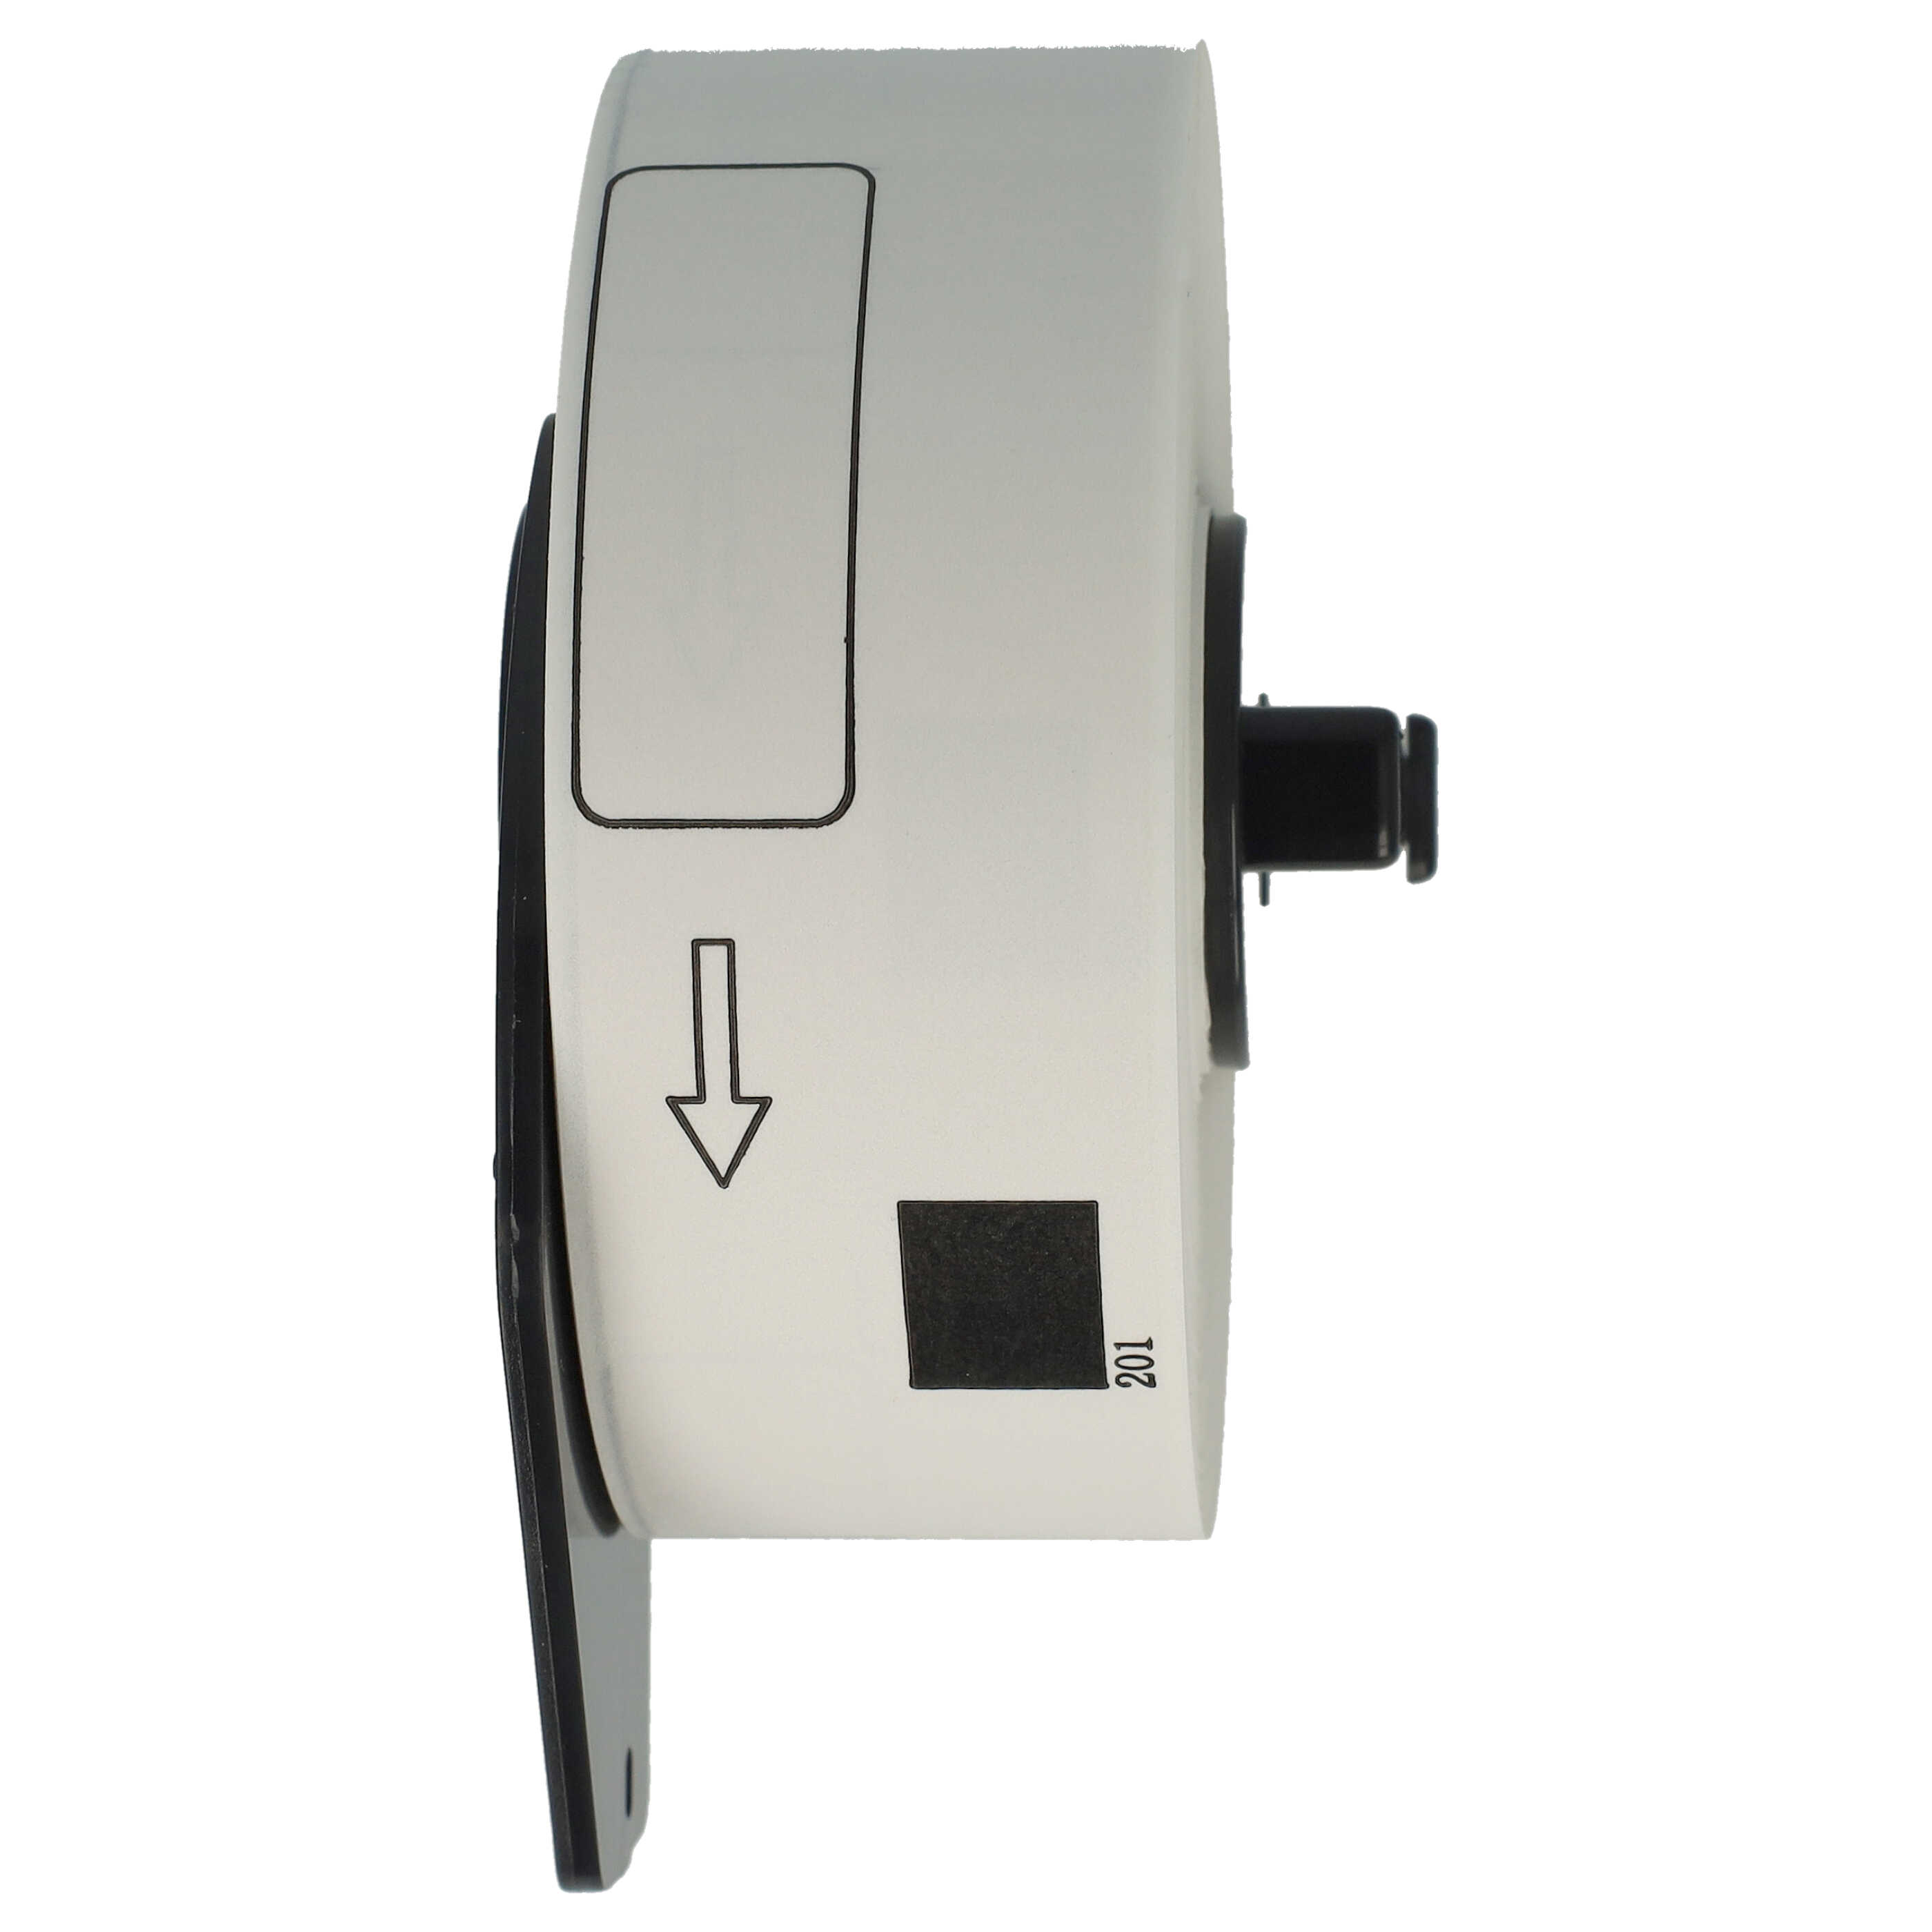 Labels replaces Brother DK-11201 for Labeller - 29 mm x 90 mm + Holder